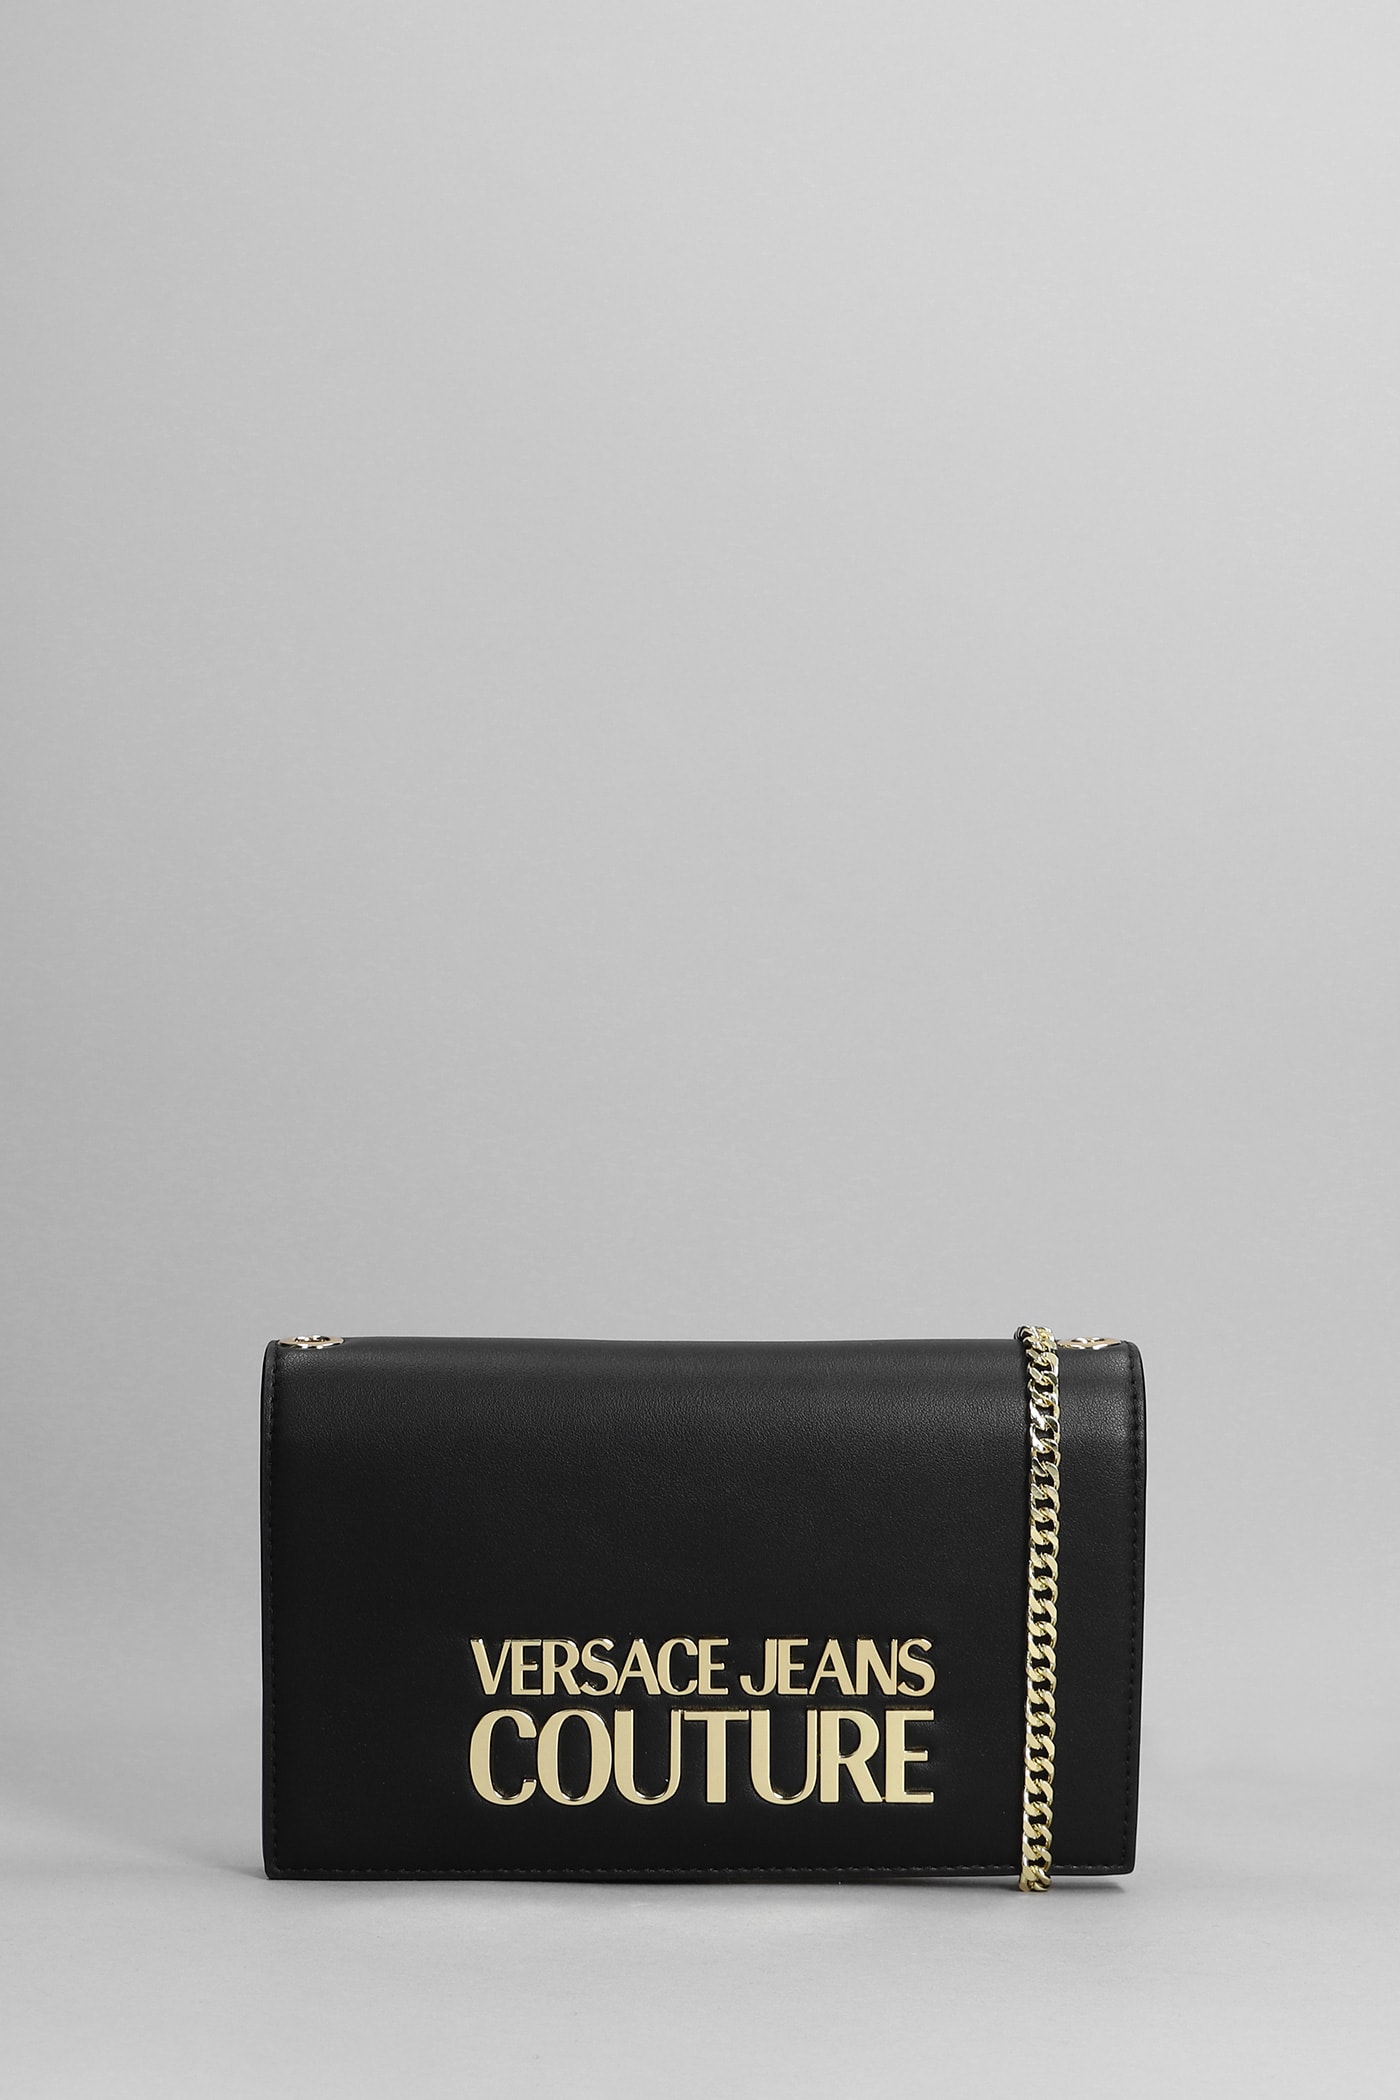 Versace Jeans Couture Clutch In Black Faux Leather